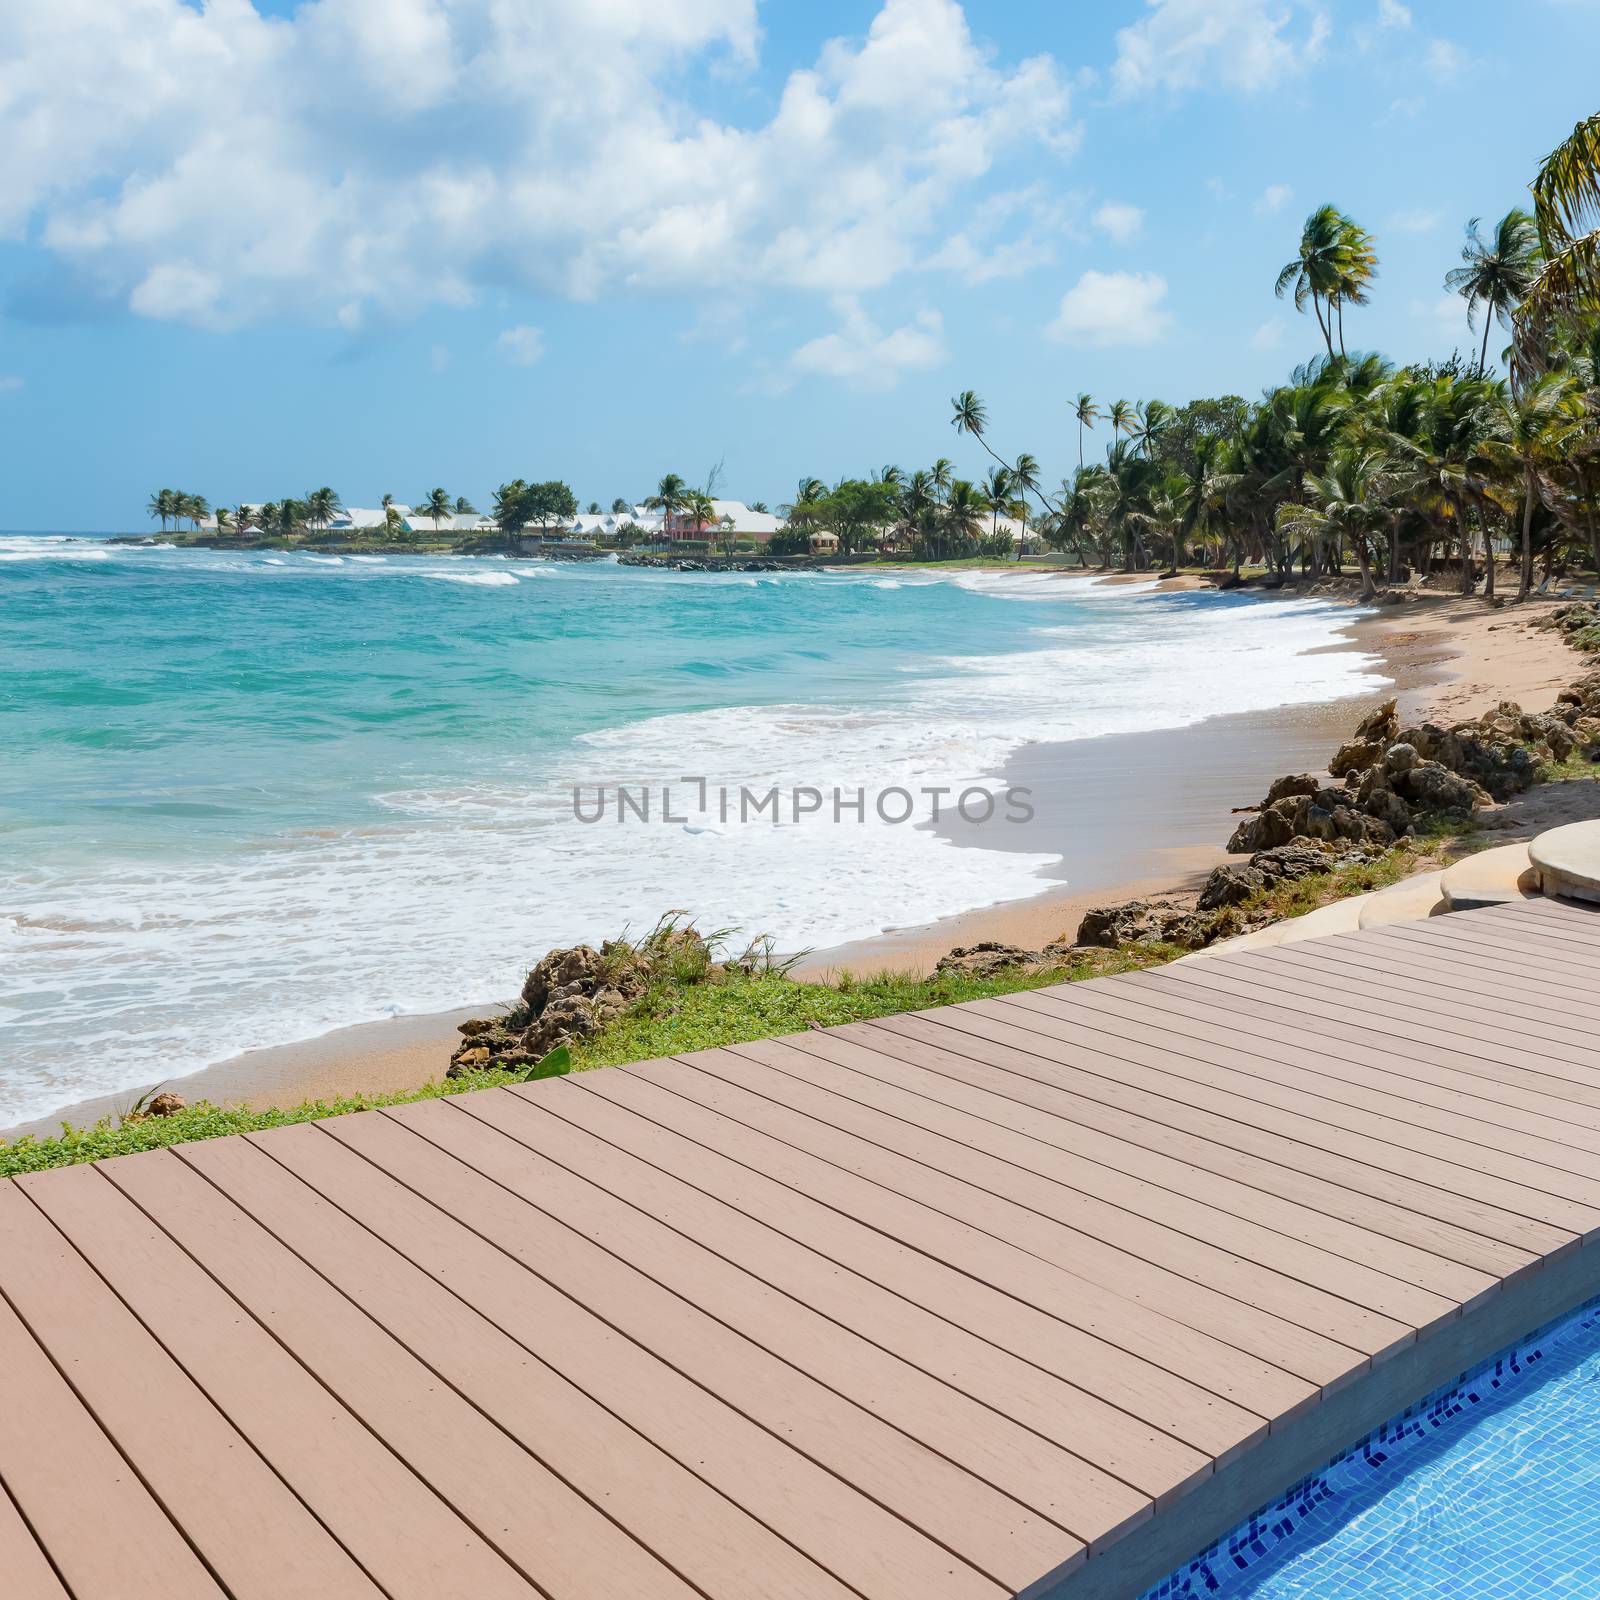 Tropical beach Tobago Caribbean nearby pool and wooden deck square